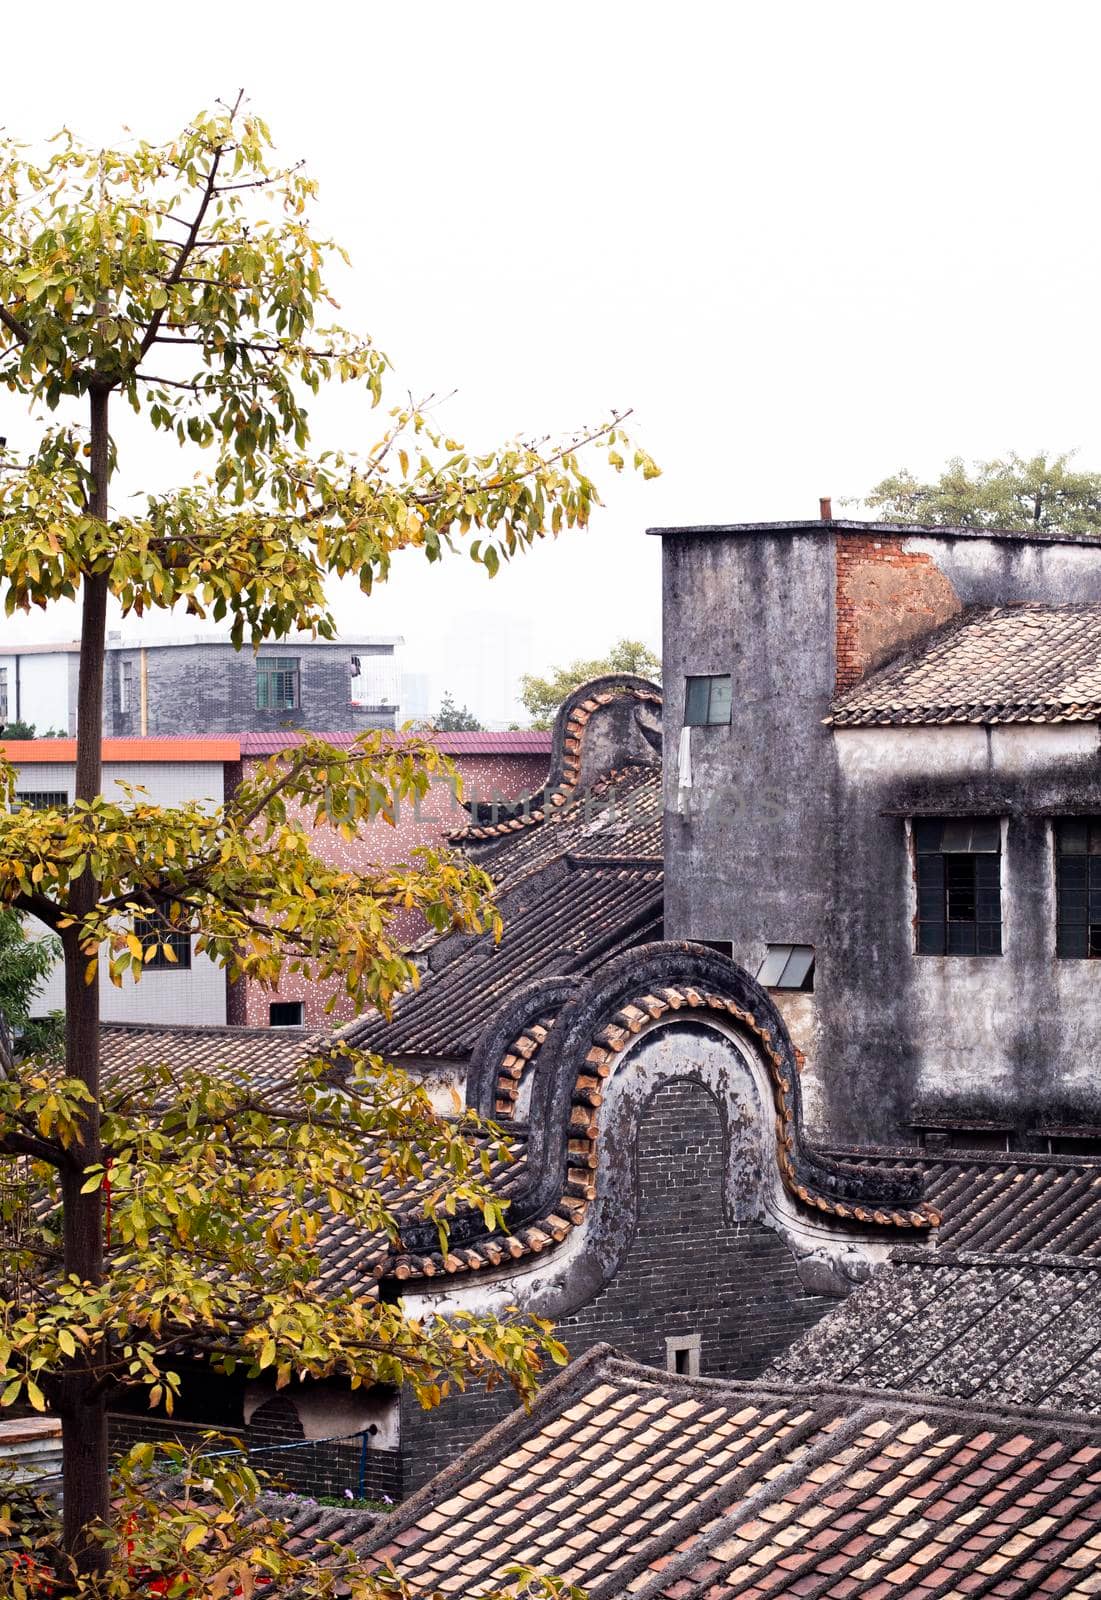 Shawan ancient town traditional roof called Wok handle-shaped roofs in Guangzhou . The Lingnan style curved roofs in old town .traditional architecture .